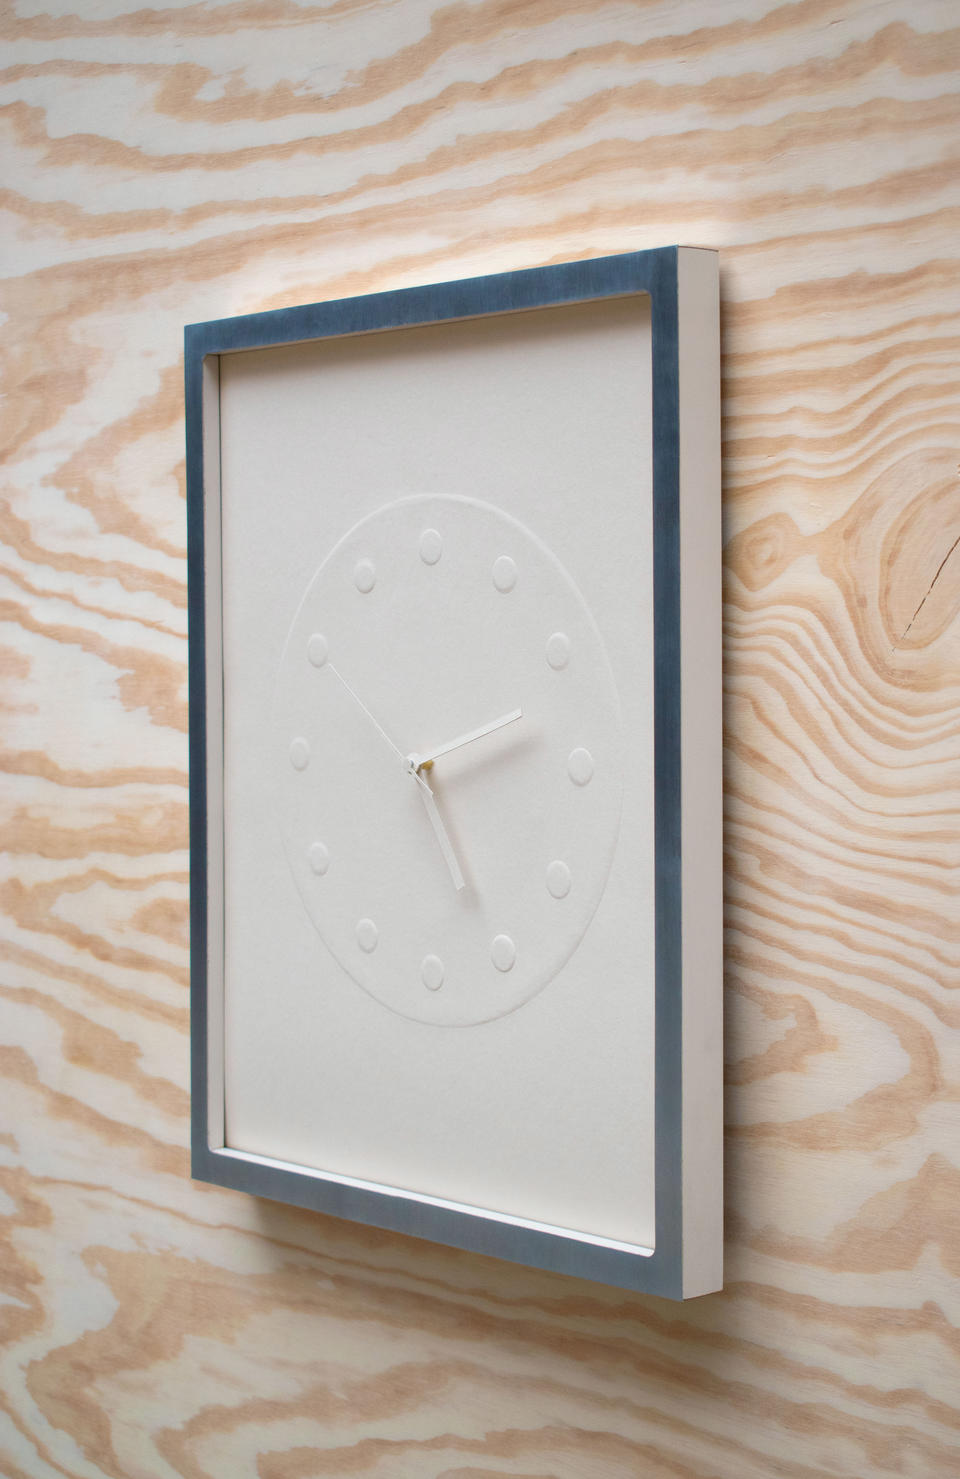 A clock made of embossed paper and presented in a custom frame.